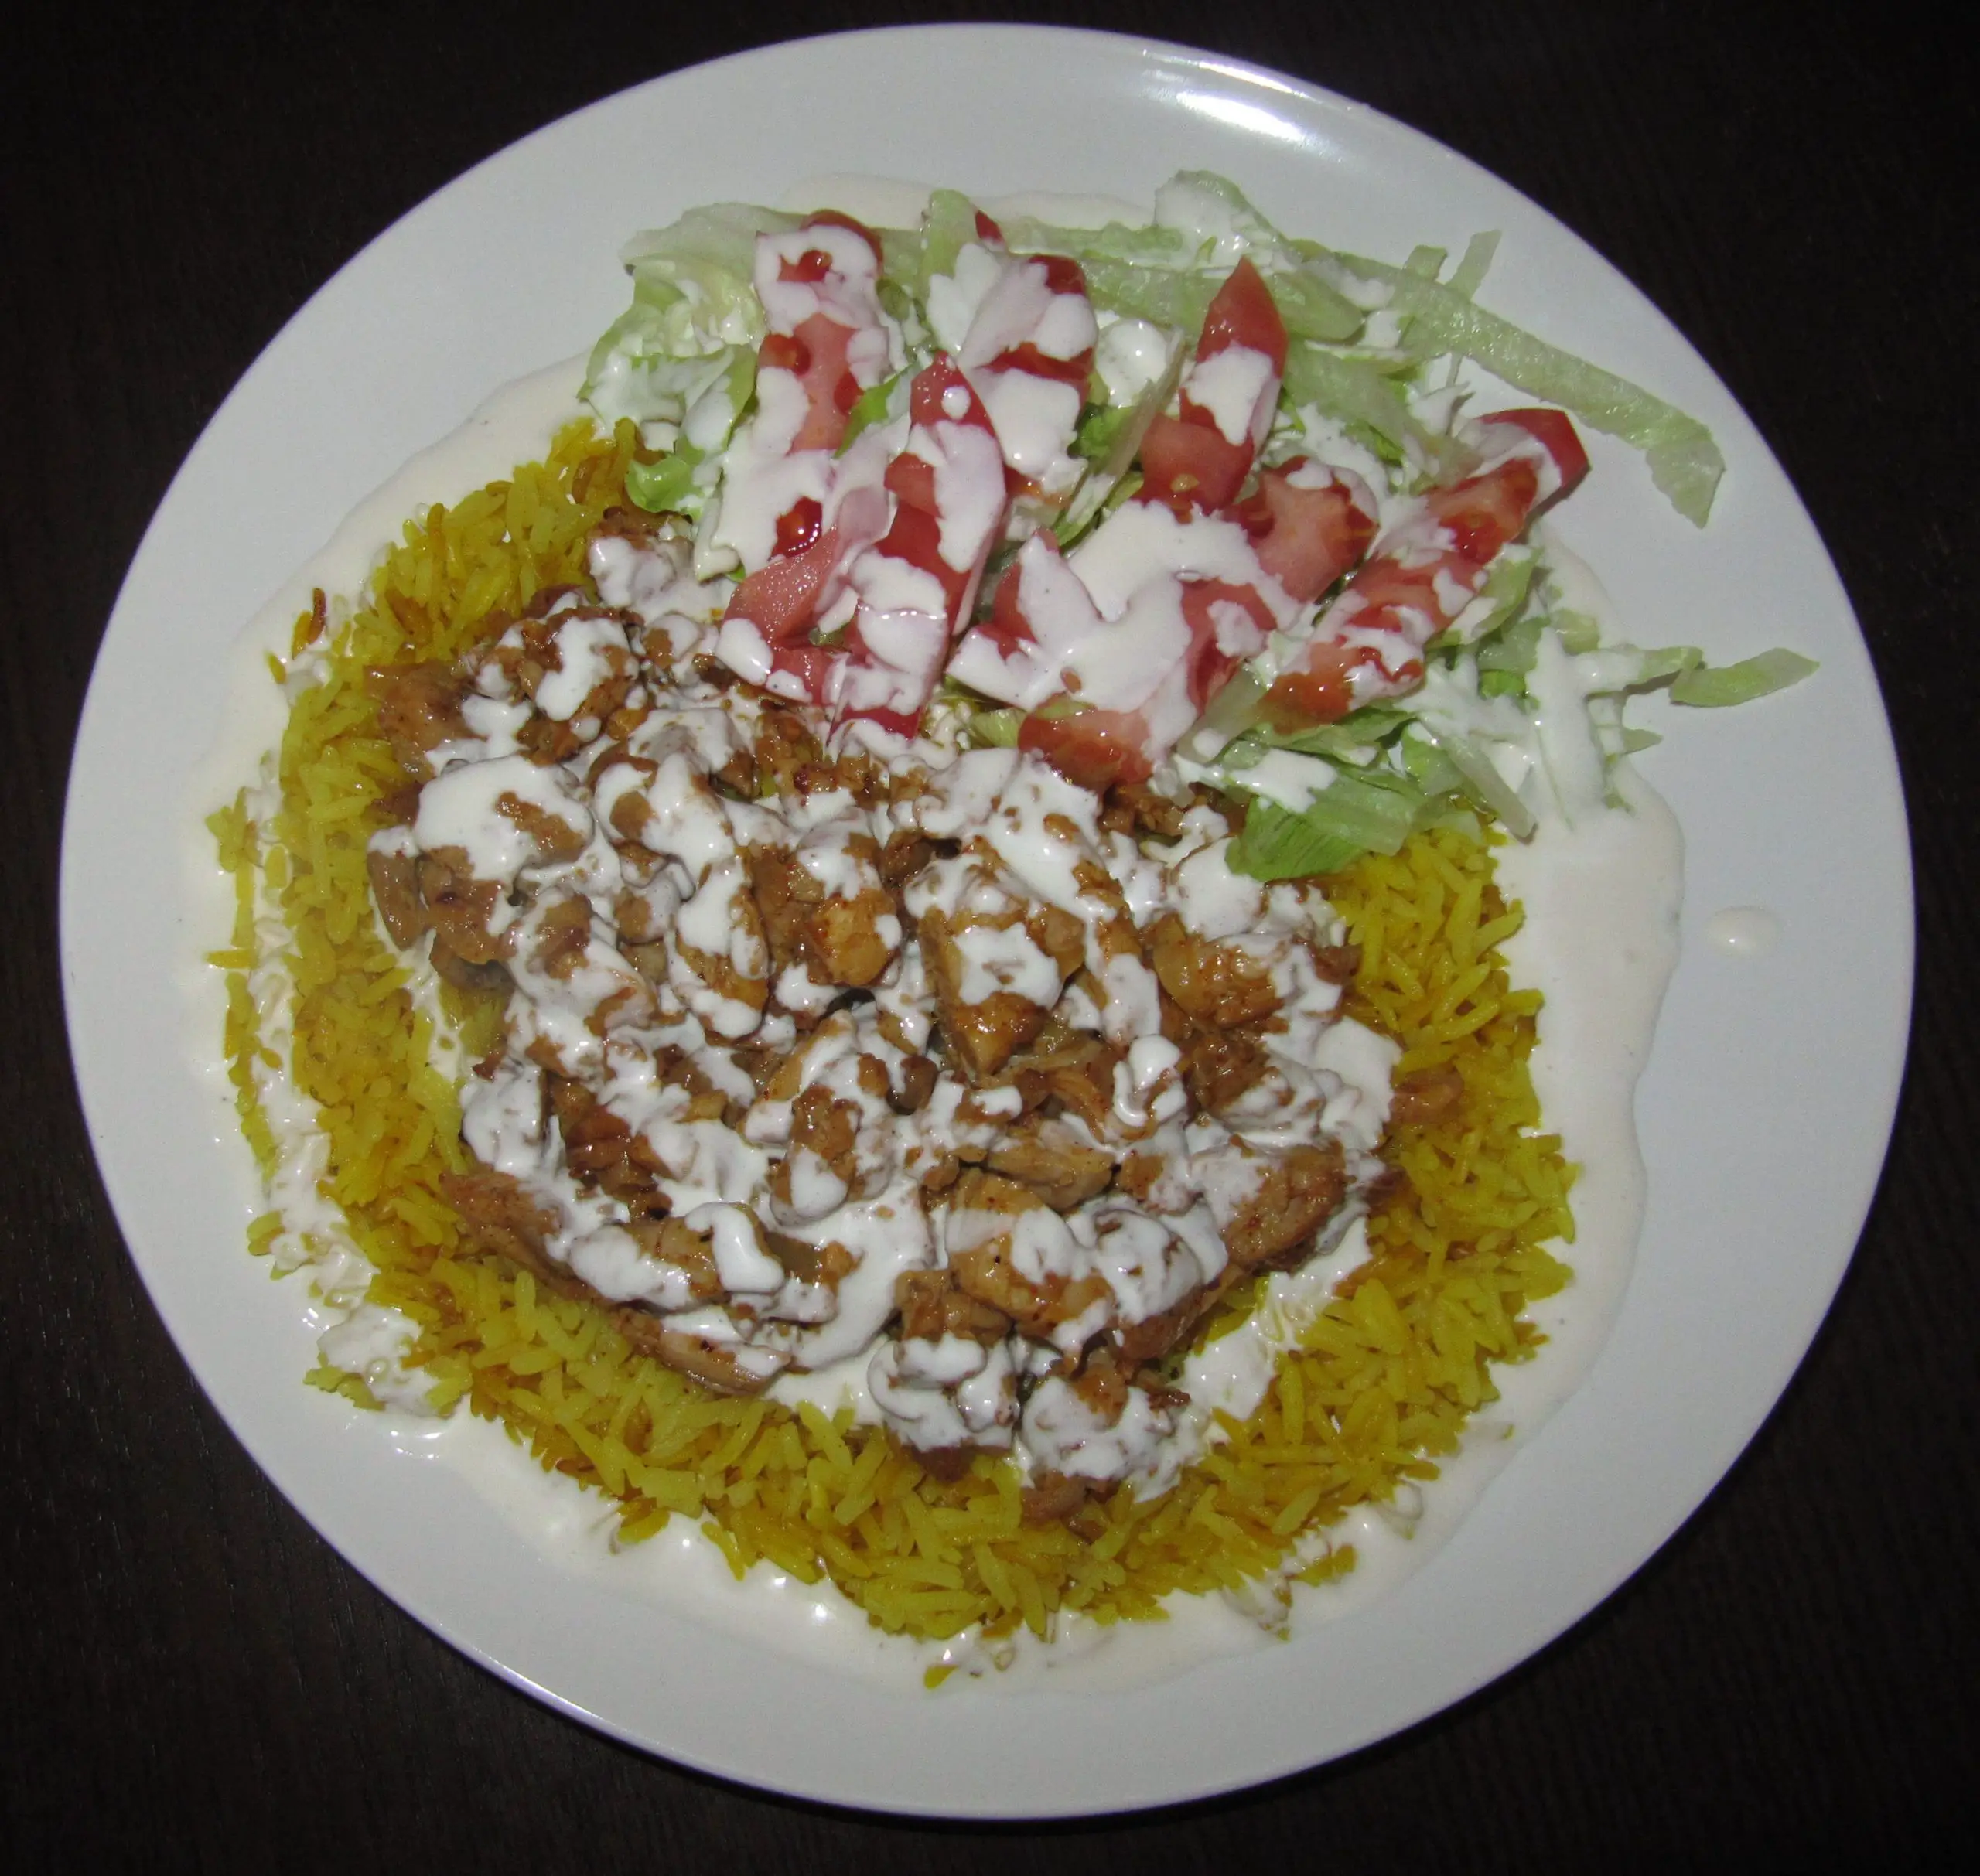 Halal Chicken over Rice, featuring the famous White Sauce